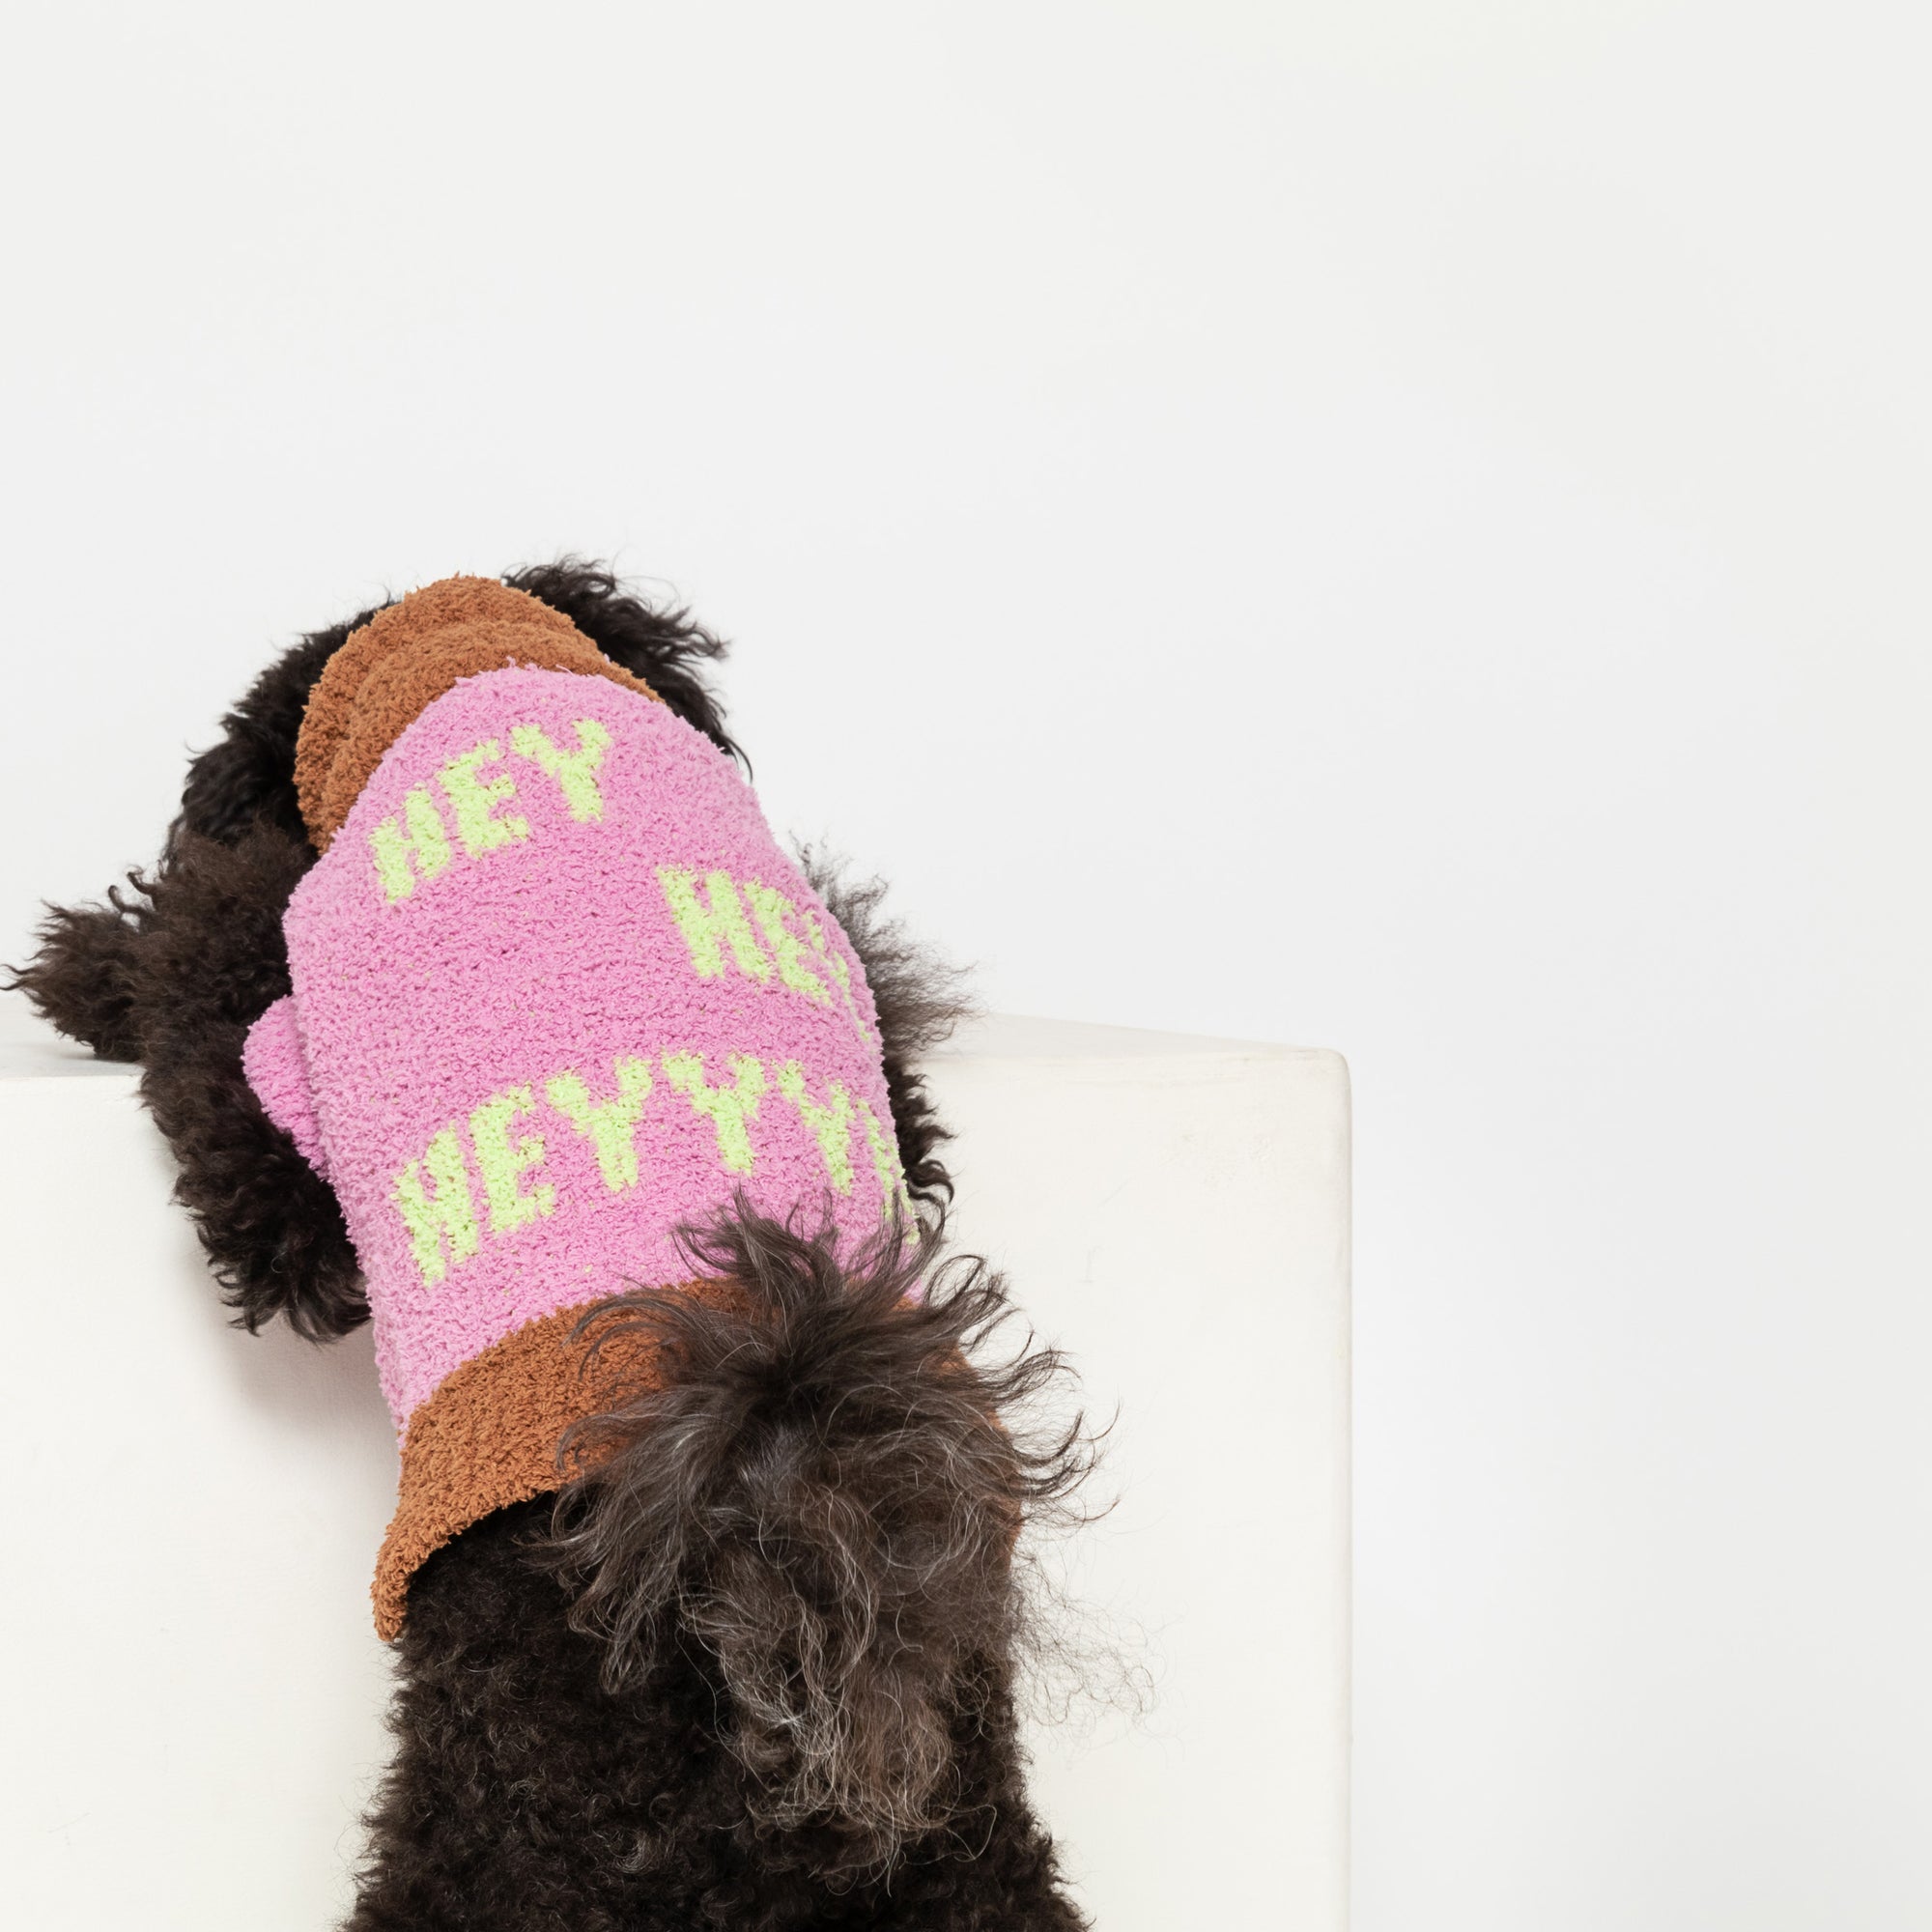  Poodle in "The Furryfolks" 'Hey sweater, back turned, on a white cube against a neutral background.